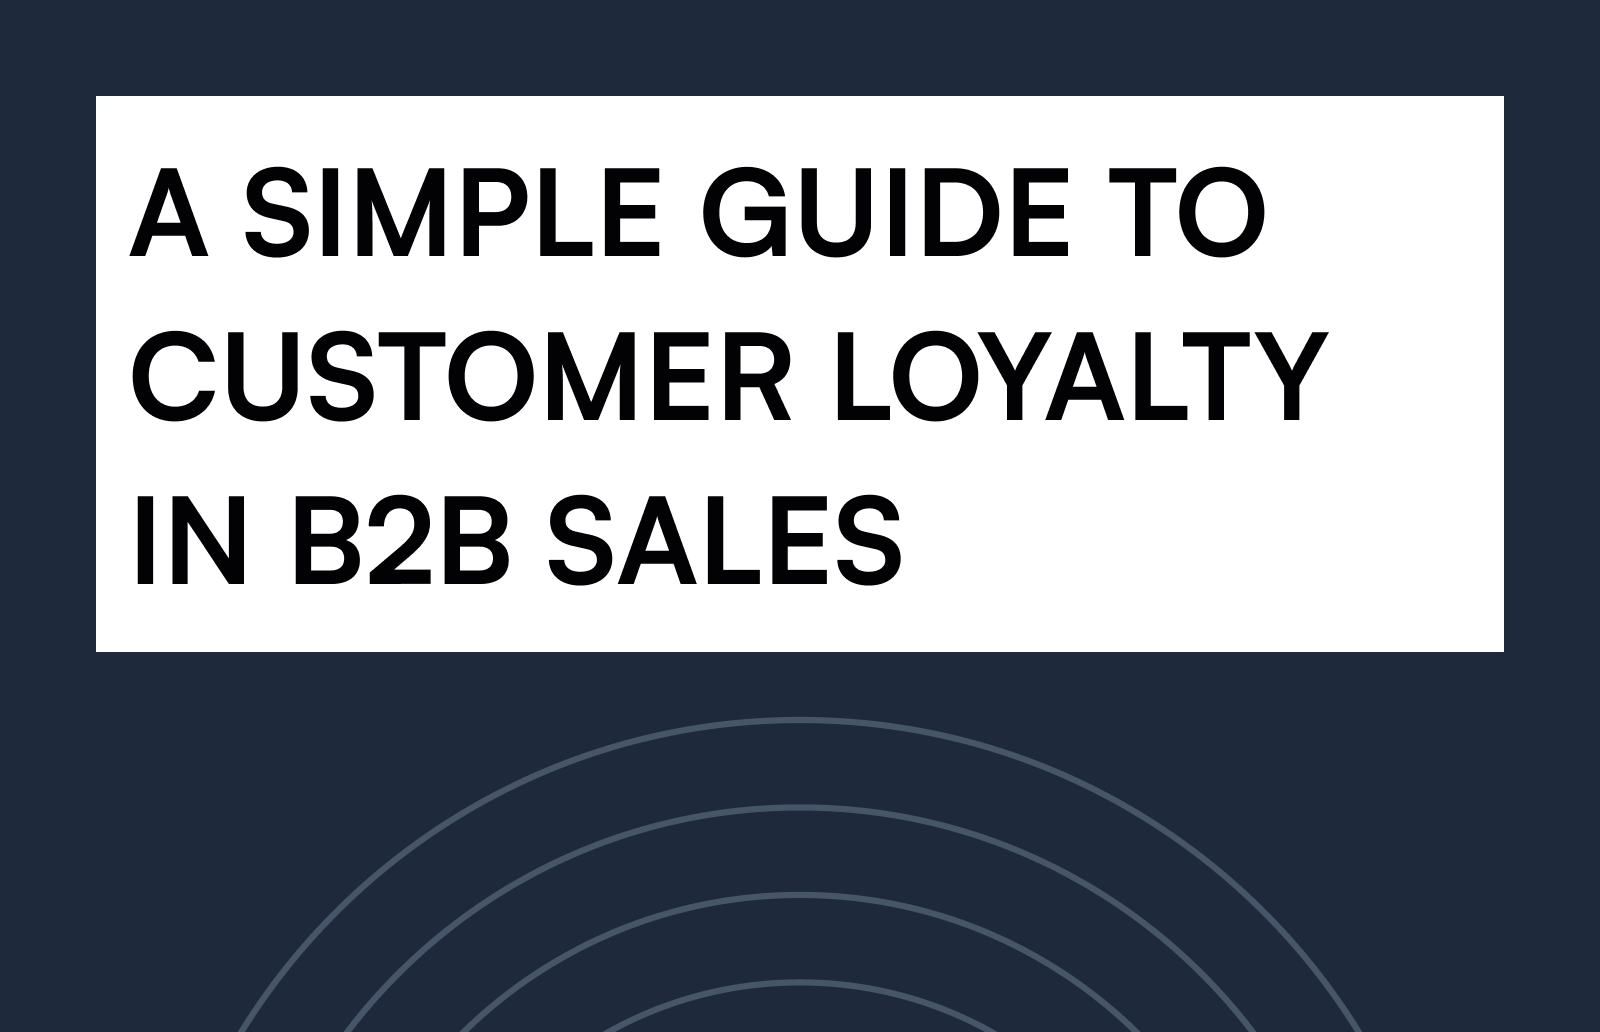 A SIMPLE GUIDE TO CUSTOMER LOYALTY IN B2B SALES